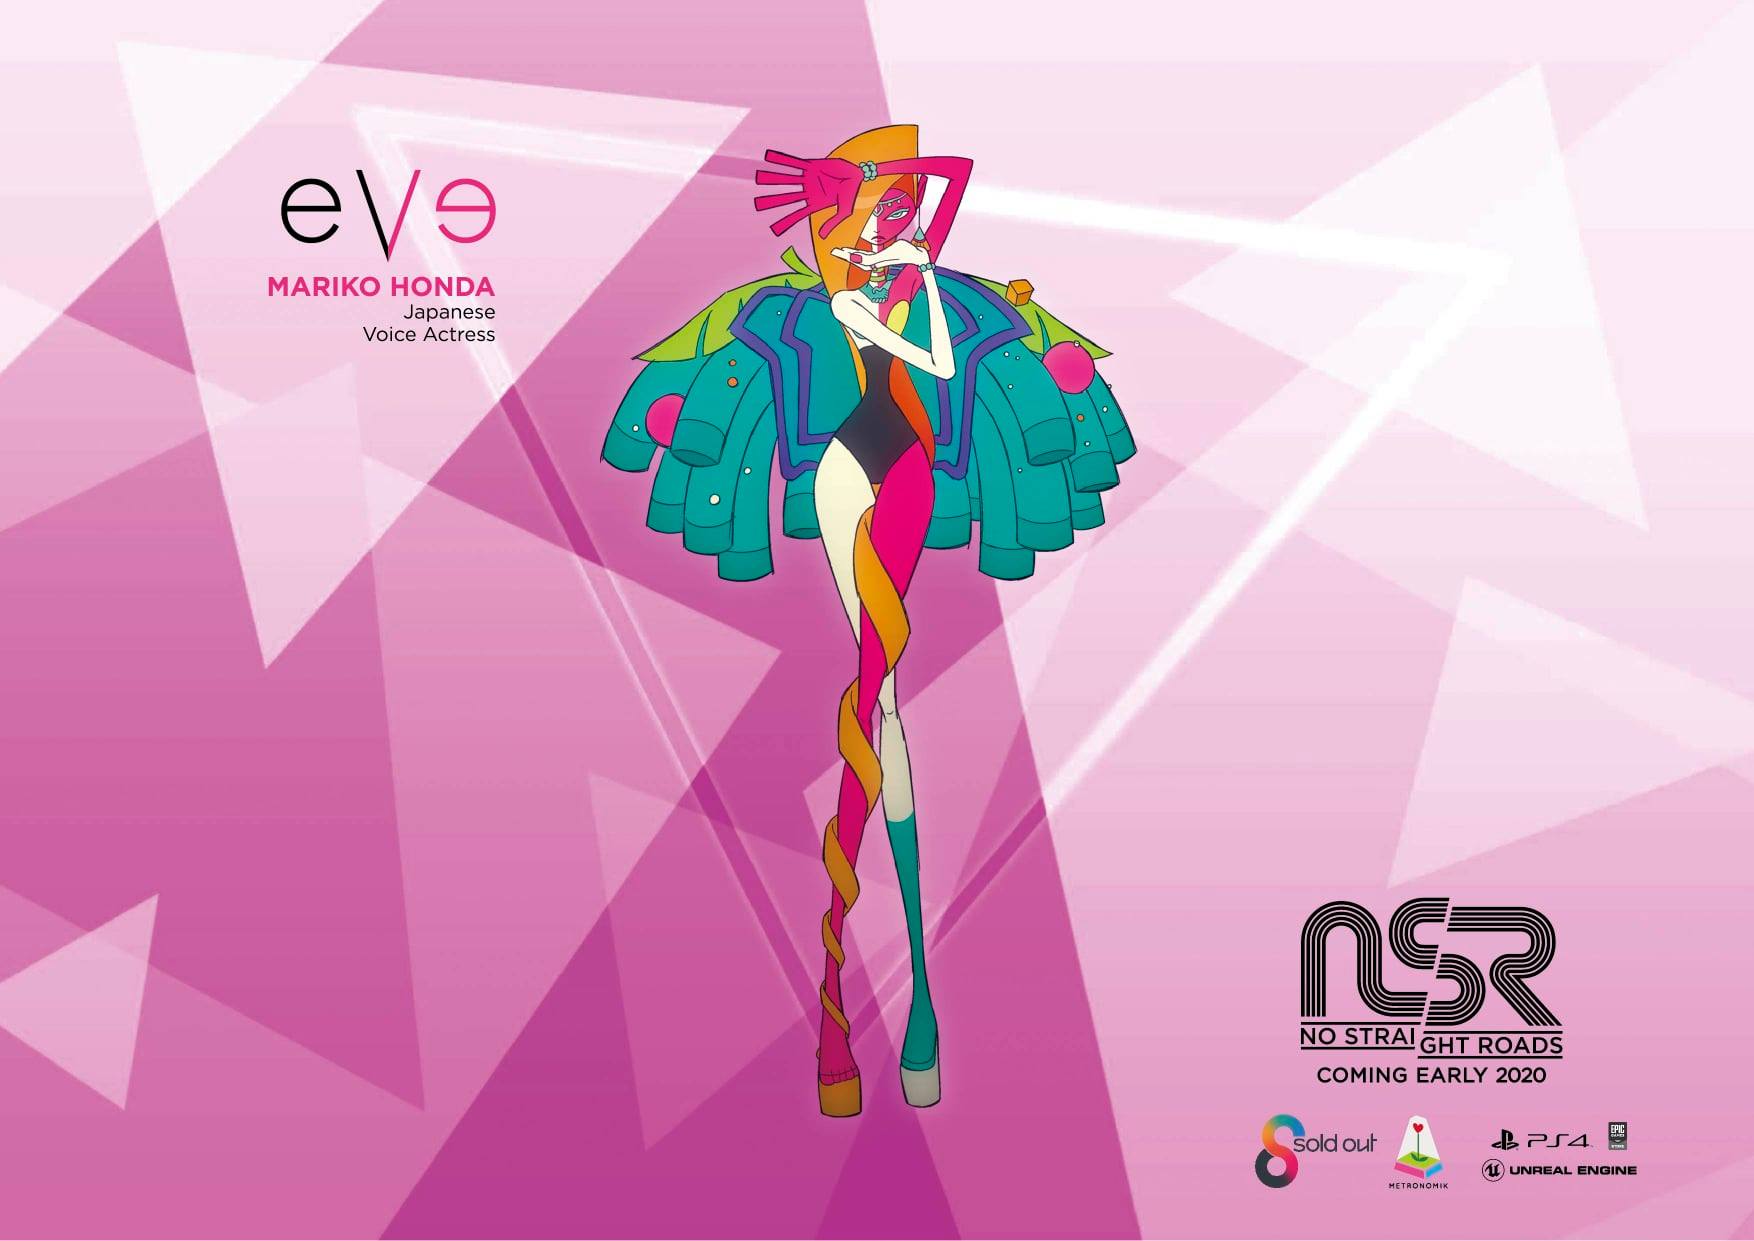 No Roads 🎸 on Twitter: "🌟 New character 🌟 Introducing a musical diva of manipulating reality... If you're at Comic Fiesta, swing by our booth to get an